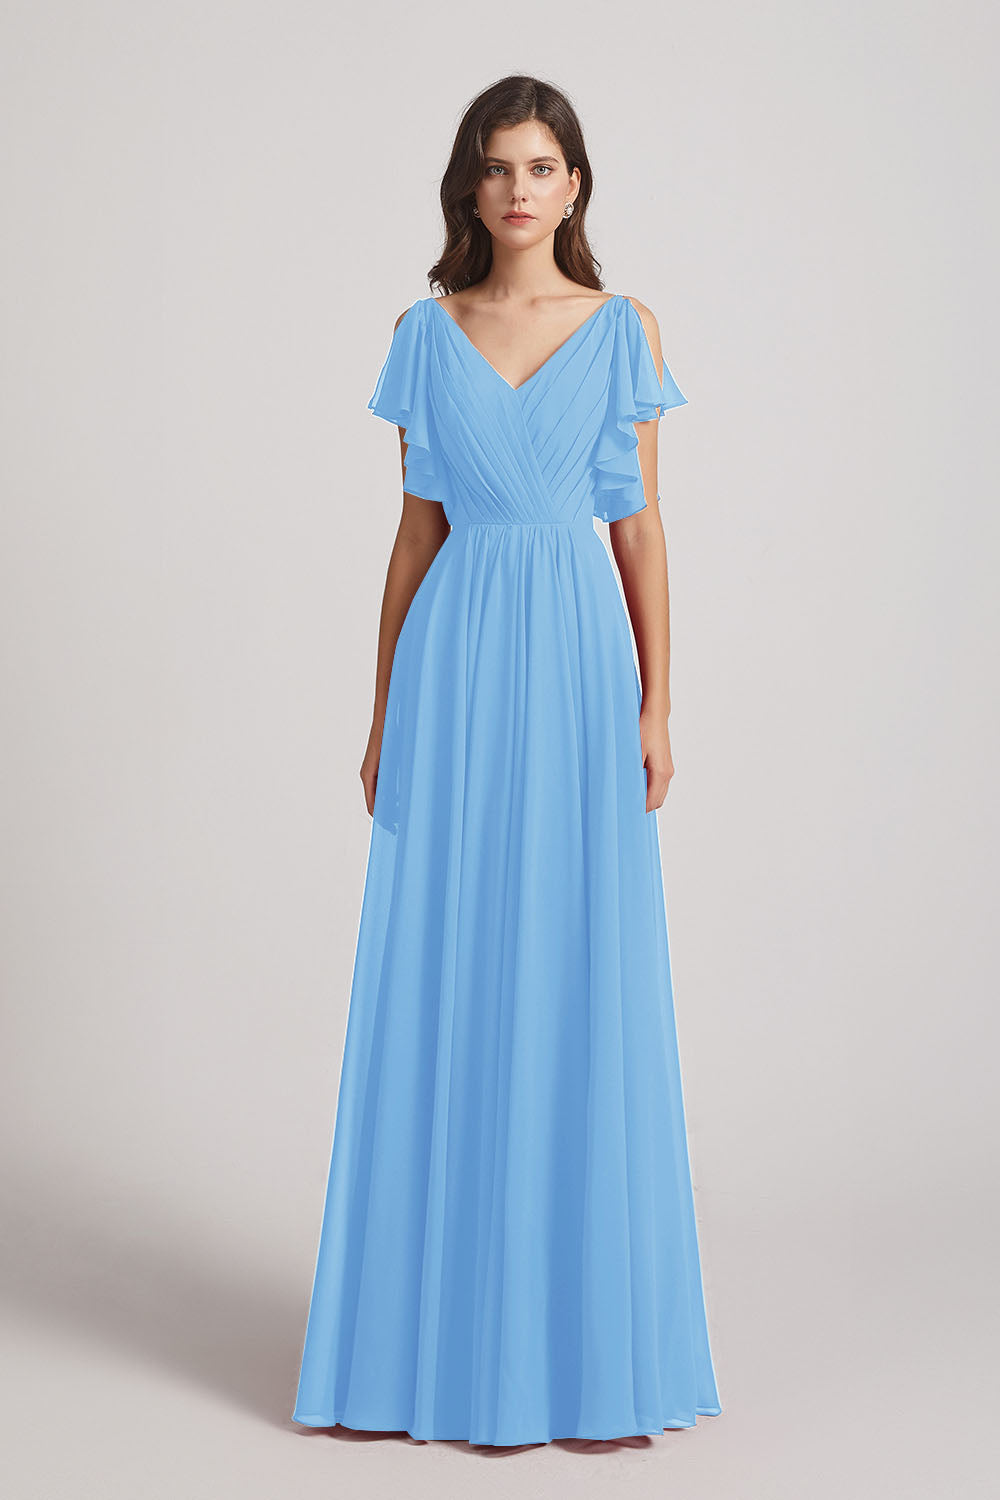 Alfa Bridal Periwinkle V-Neck Pleated Chiffon Bridesmaid Dresses with Open Flutter Sleeves (AF0098)